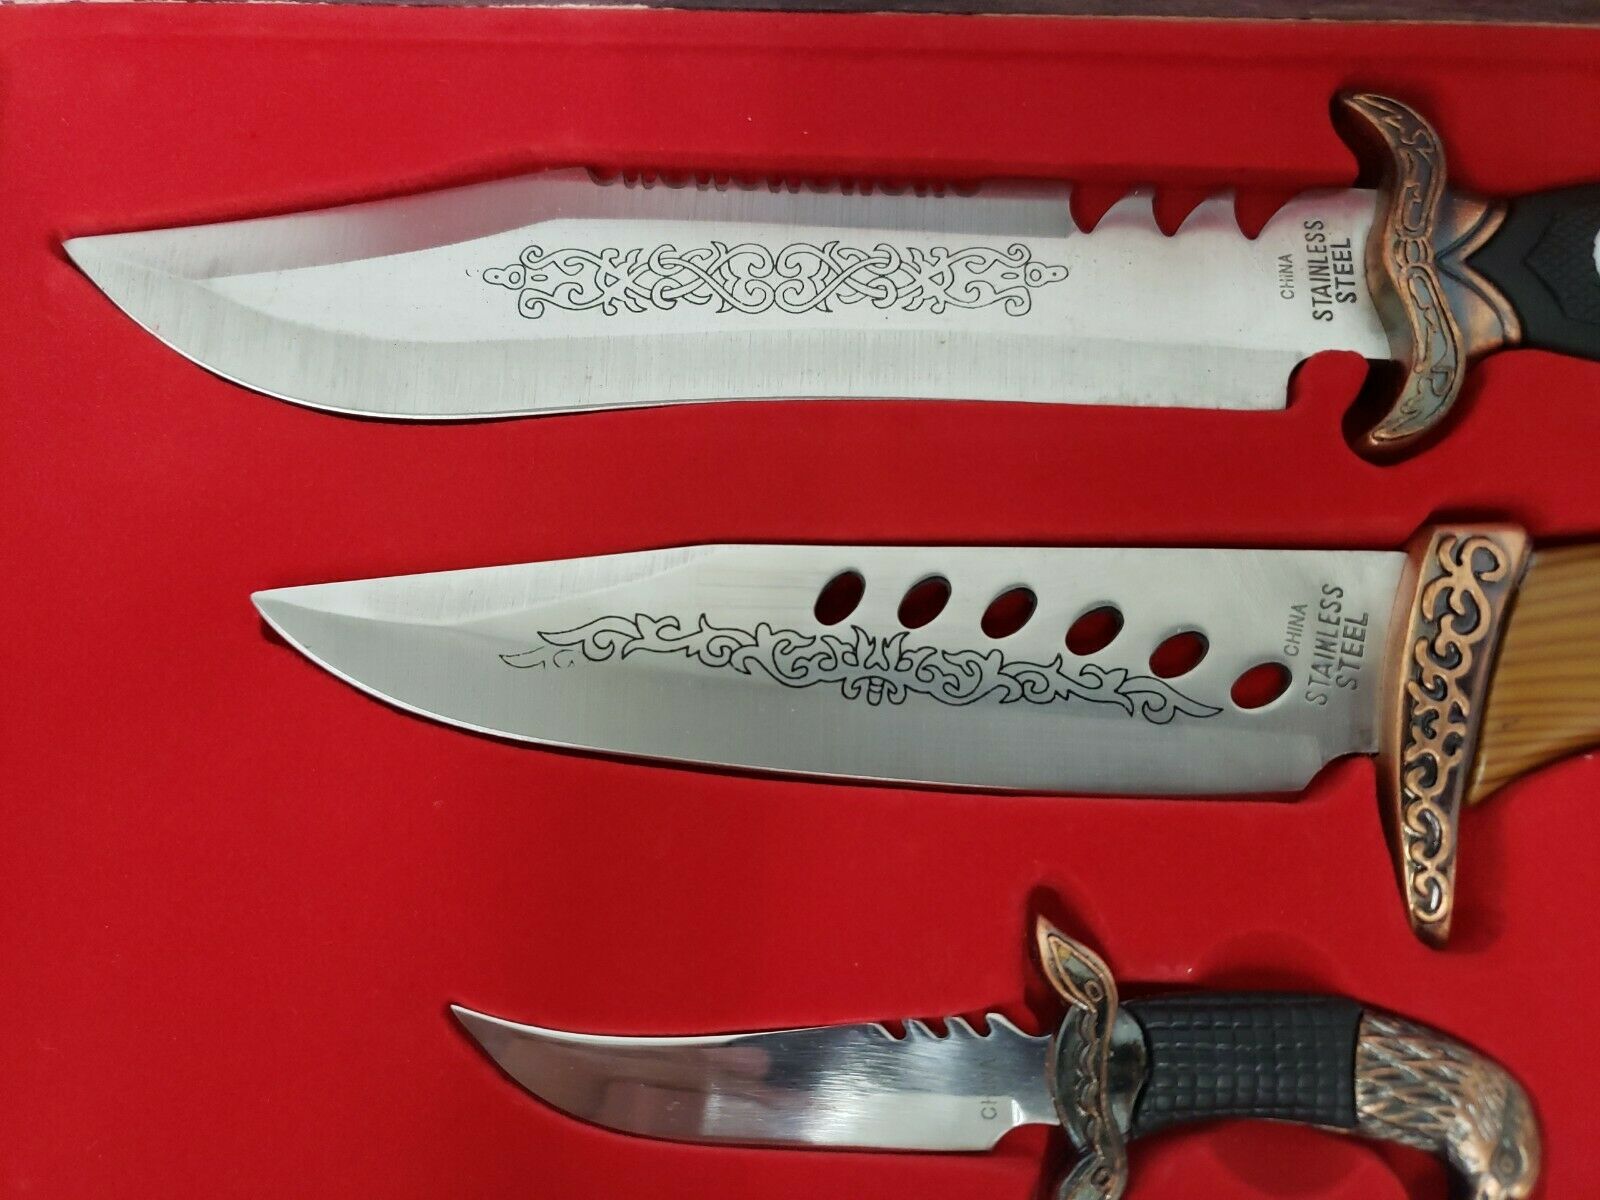 Received two Mosfiata knives (made in China) as a gift and I'm not